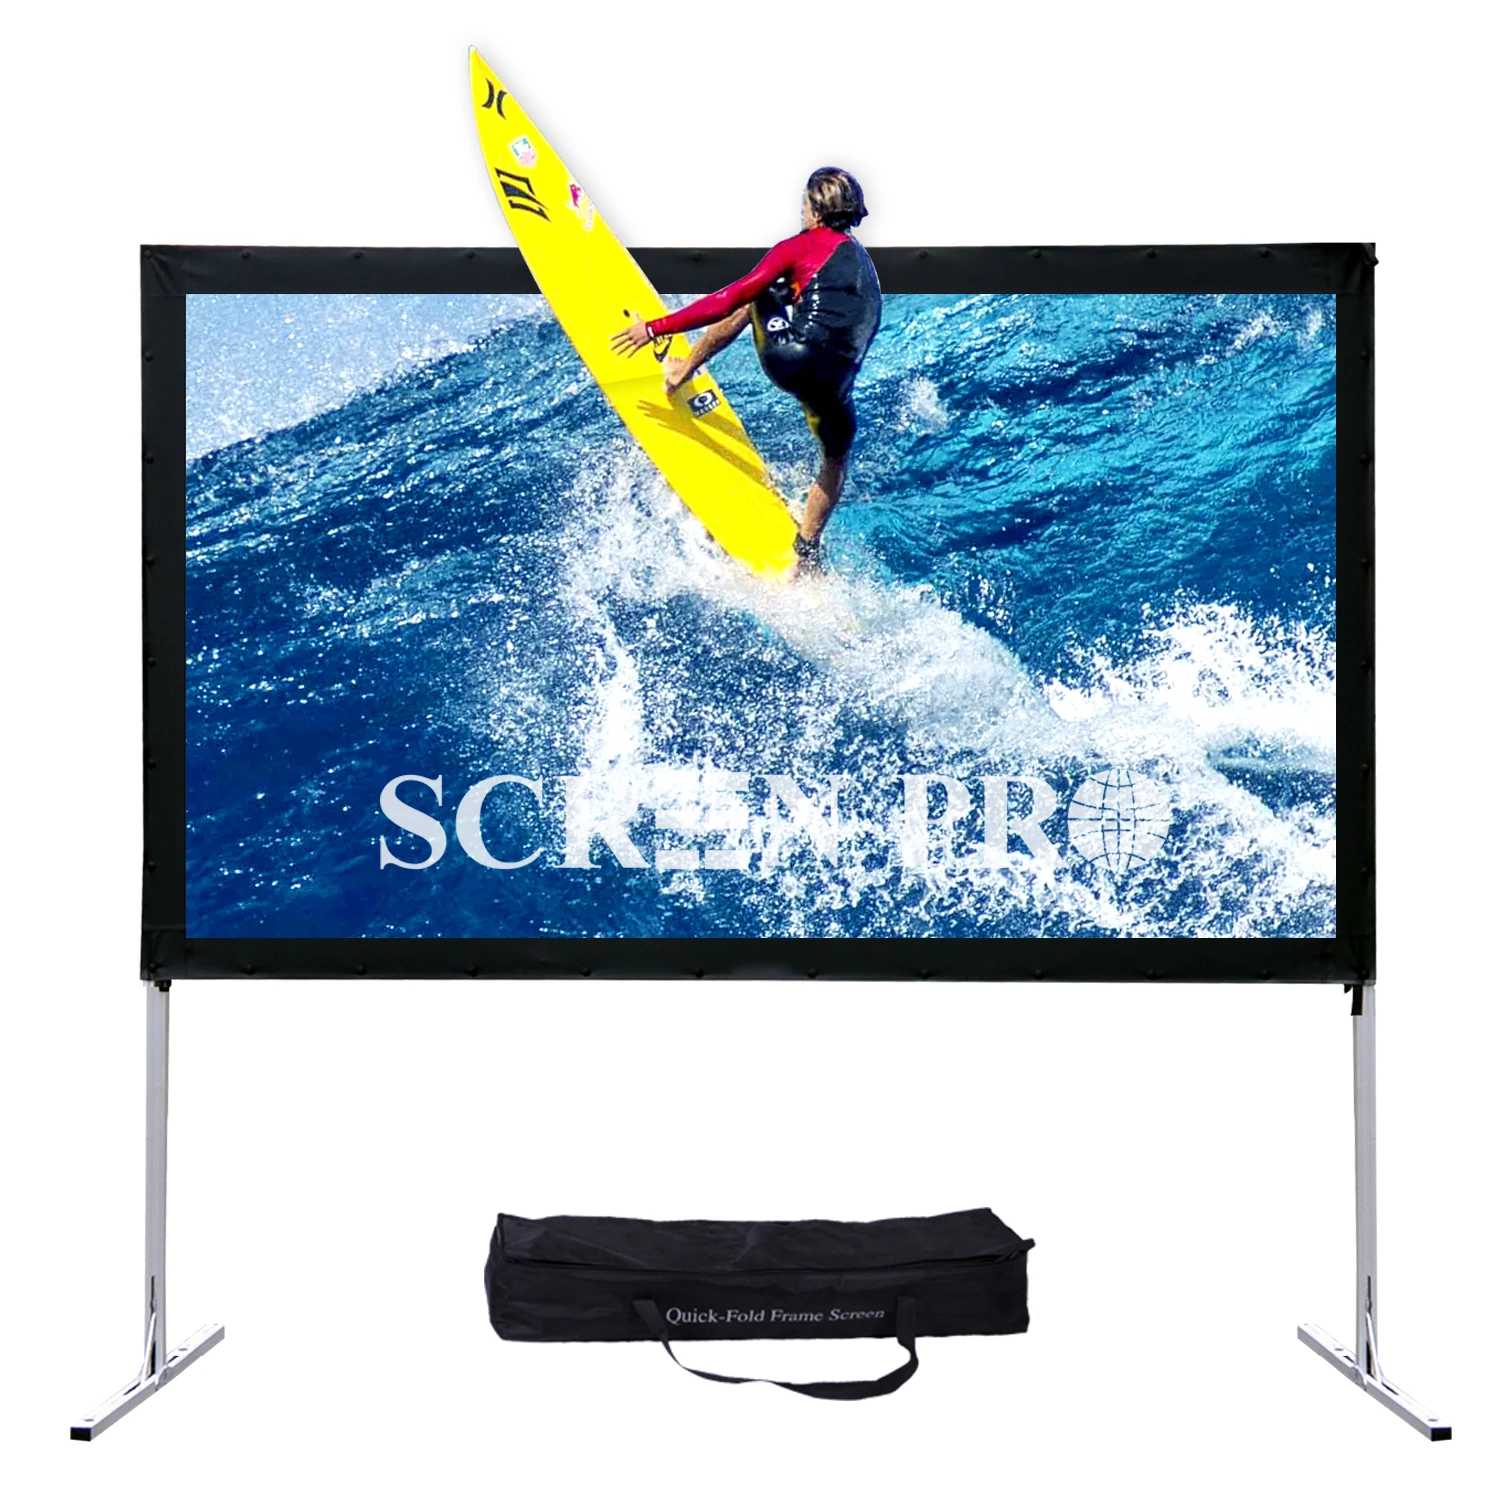 

Screen Pro 110 Inches 16:9 Front Matte white fast fold projection screen portable easy carrying box Projector Projection Screen, Aluminum frame